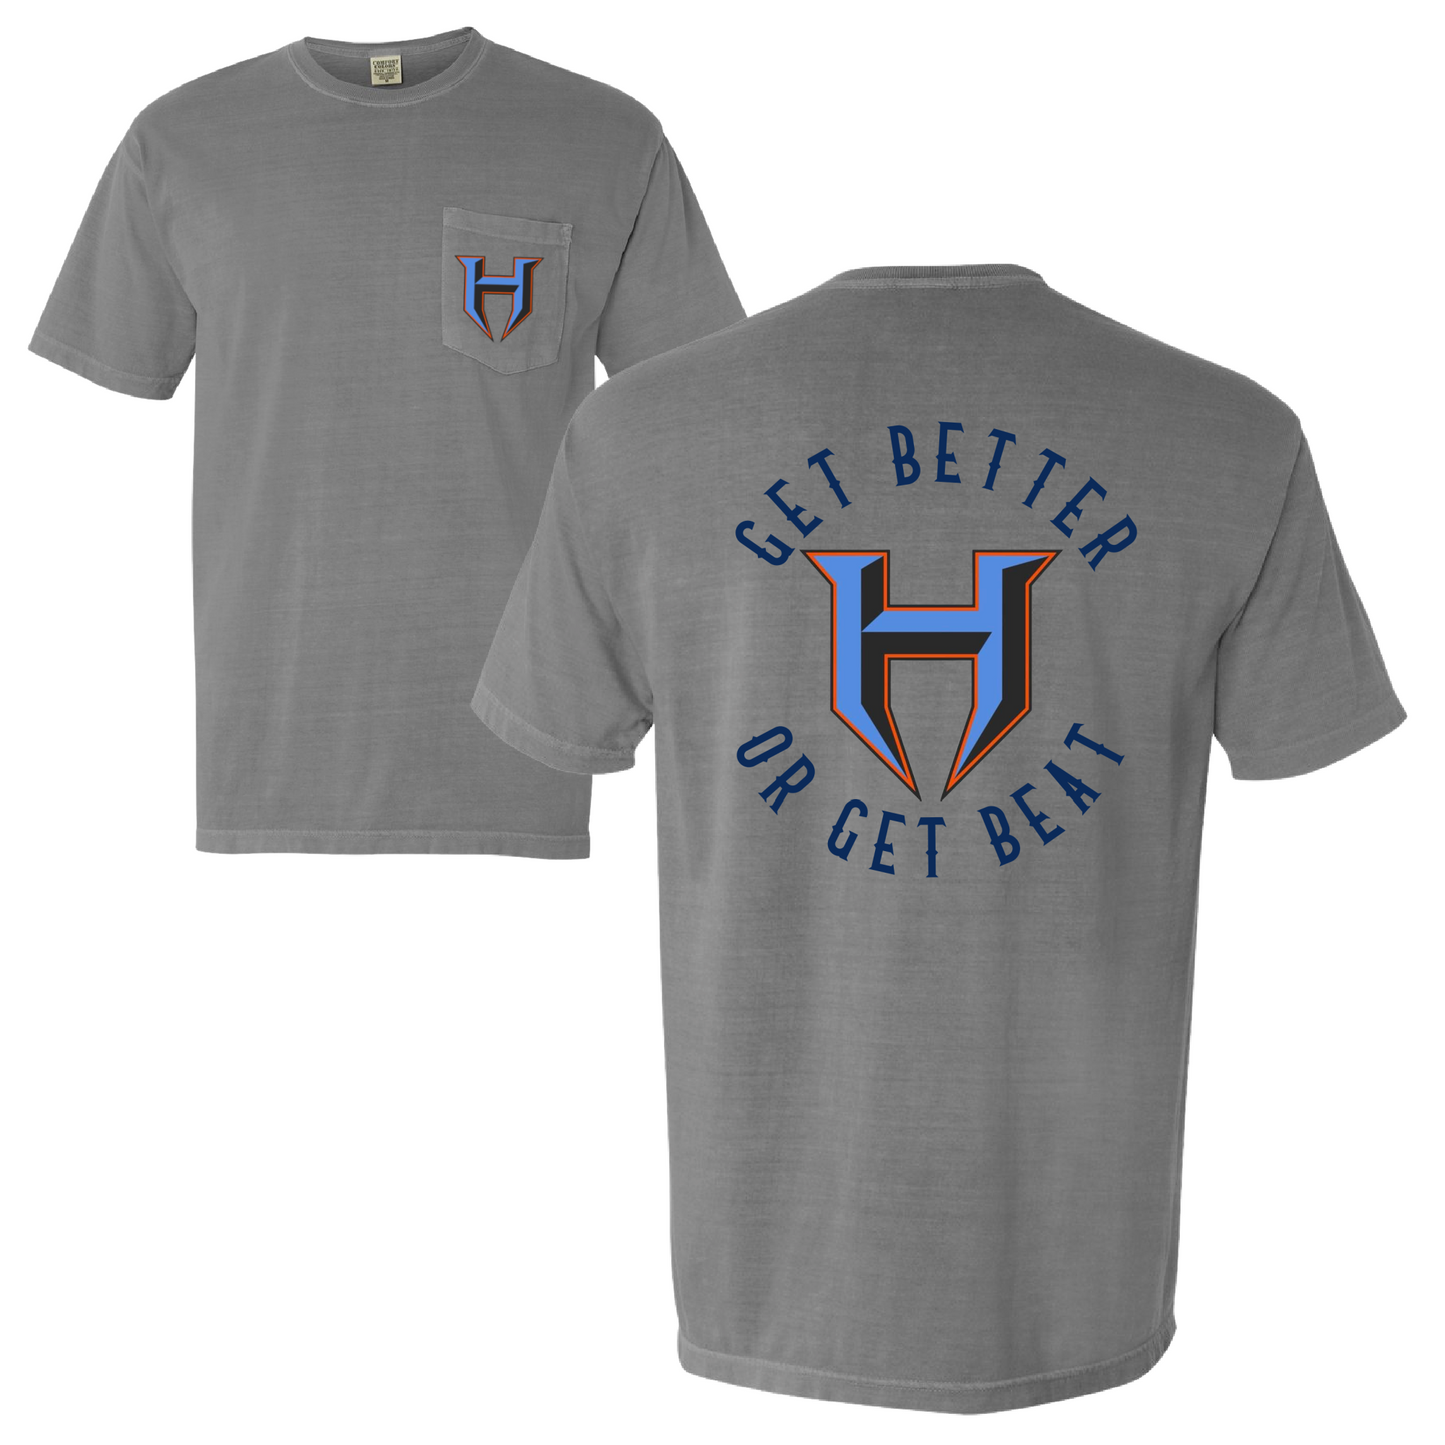 Comfort Colors Pocket Tee Get Better or Get Beat Hornets Baseball Tee/ YOUTH SIZES FAUX POCKET